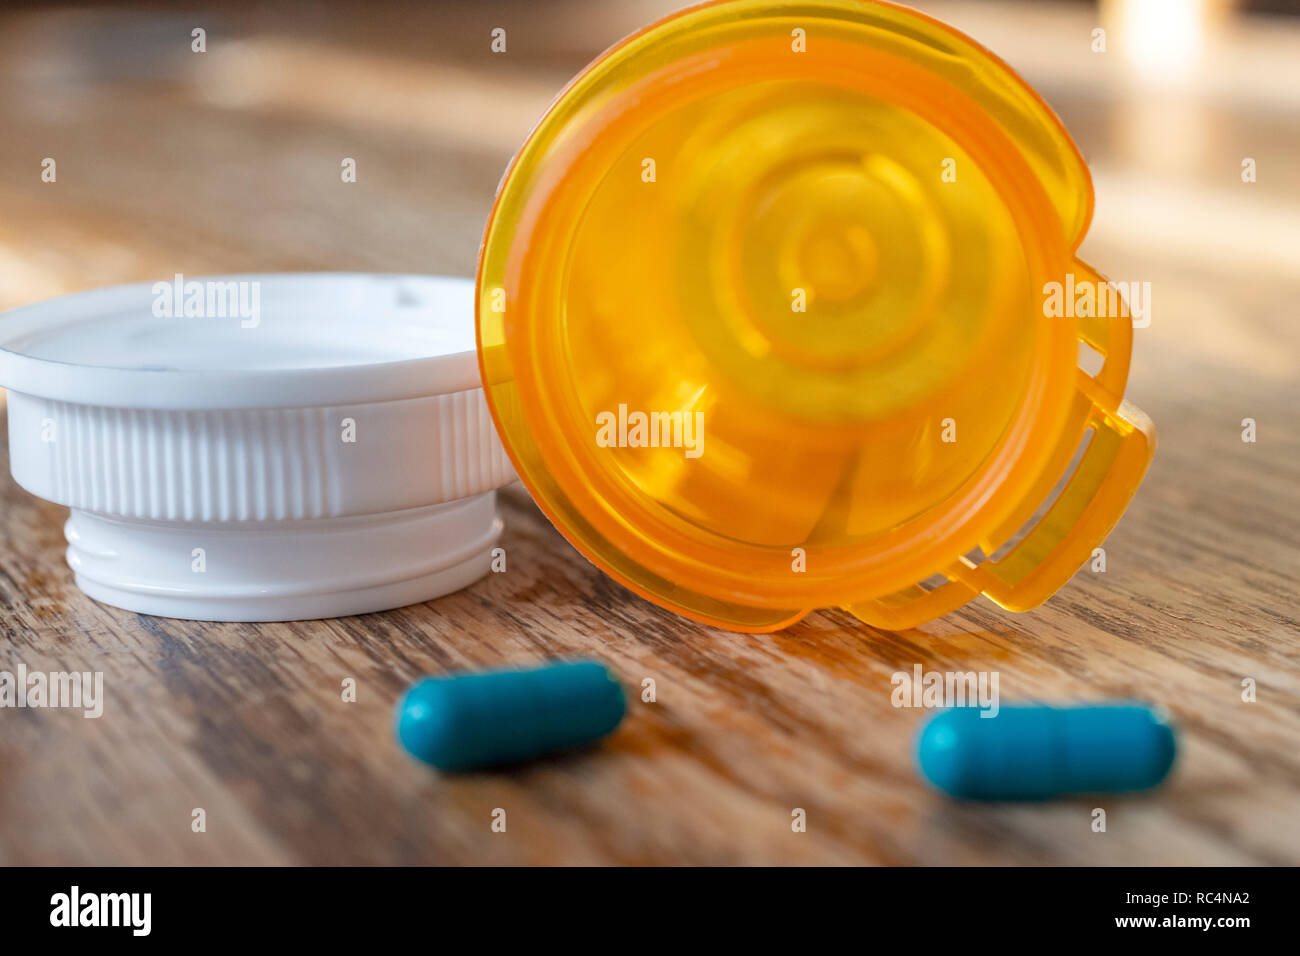 Close up of prescription pill bottle with the last two pills spilled out onto the kitchen table. Stock Photo